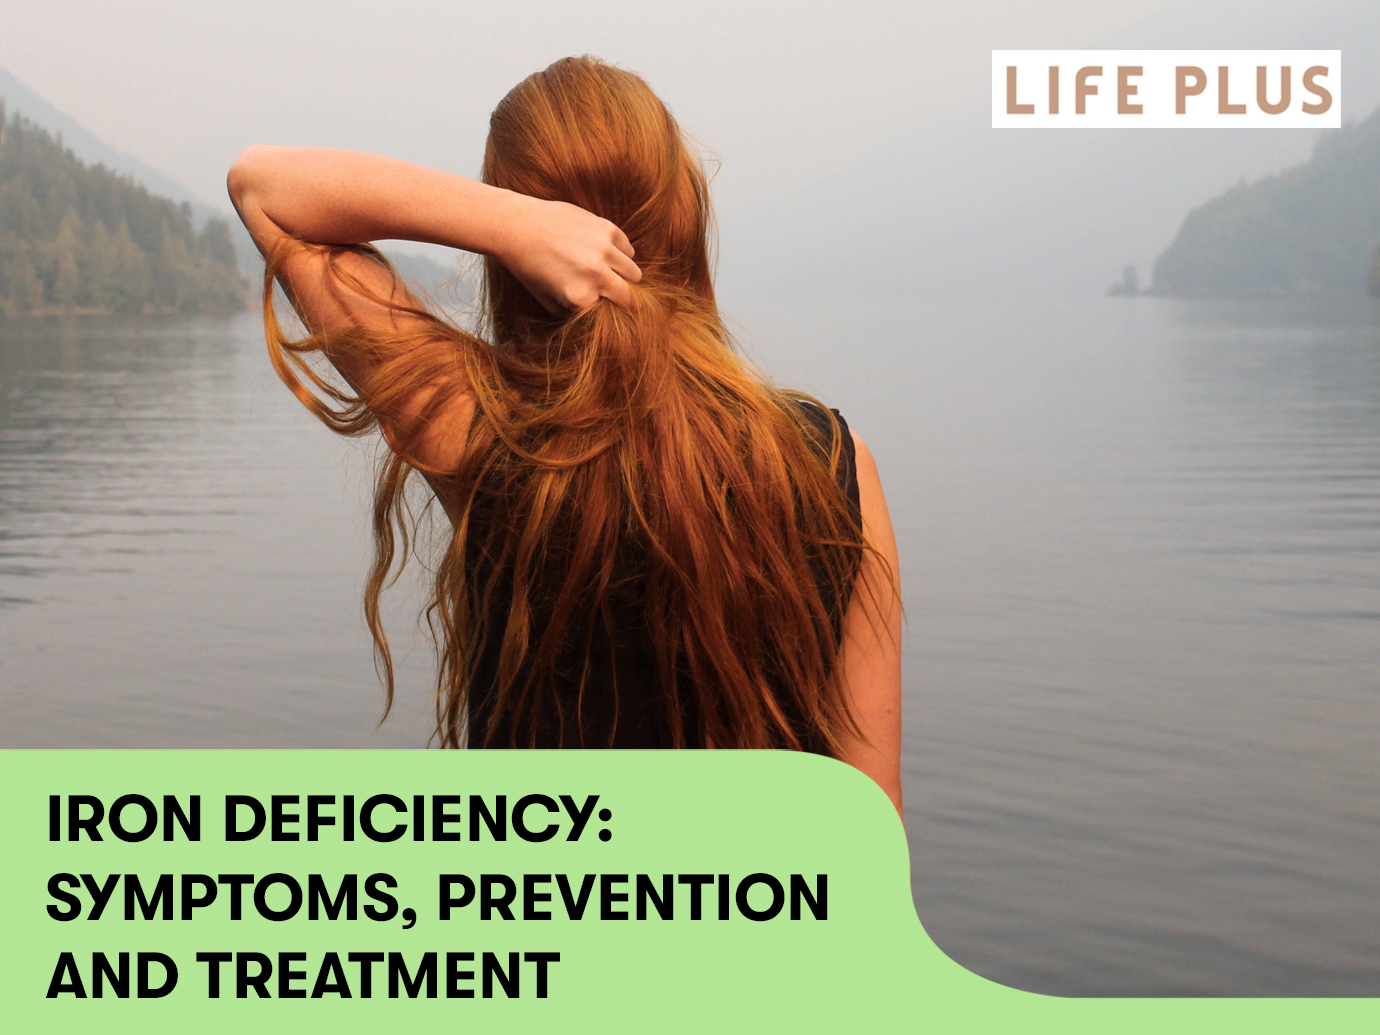 IRON DEFICIENCY: symptoms, PREVENTION AND treatment